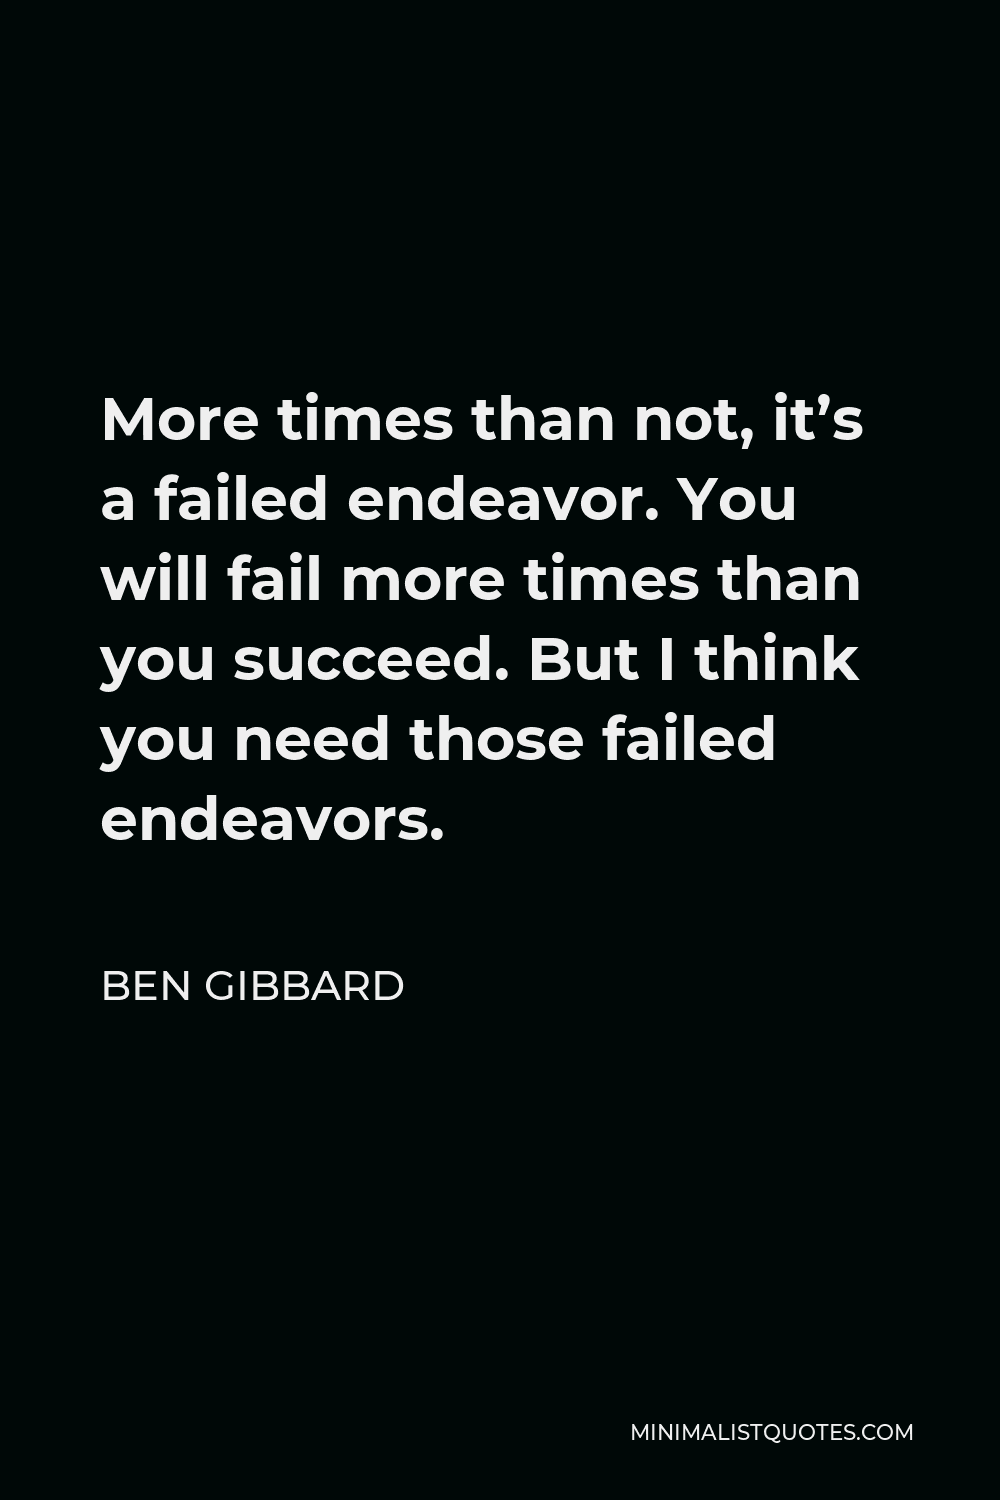 Ben Gibbard Quote - More times than not, it’s a failed endeavor. You will fail more times than you succeed. But I think you need those failed endeavors.